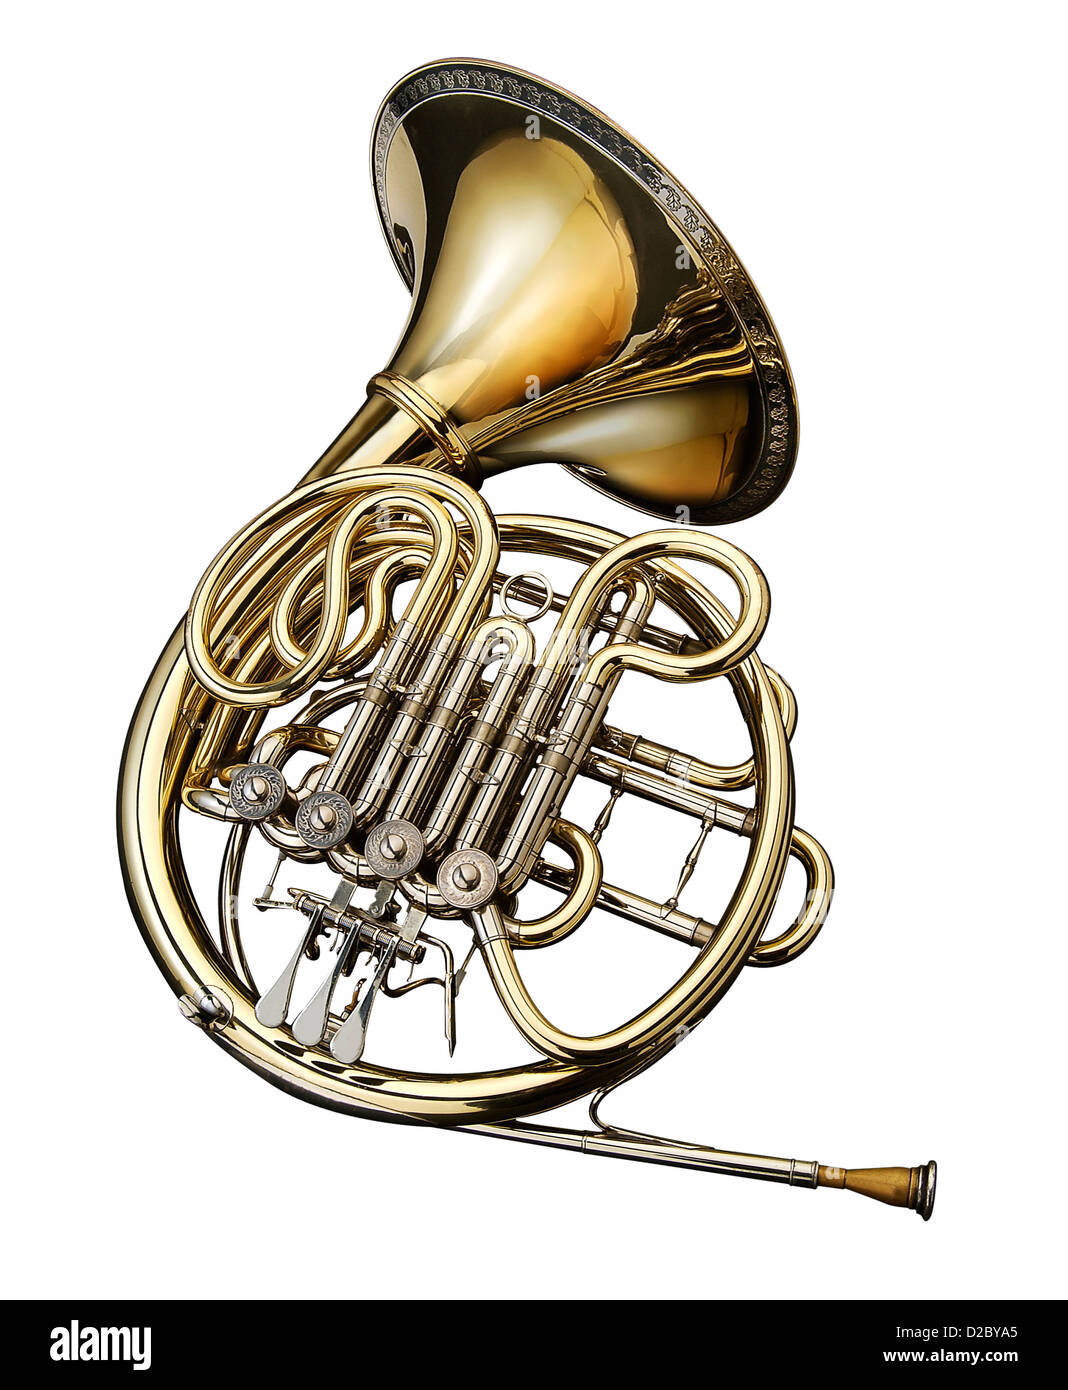 French horn wind instrument. On a white background Stock Photo